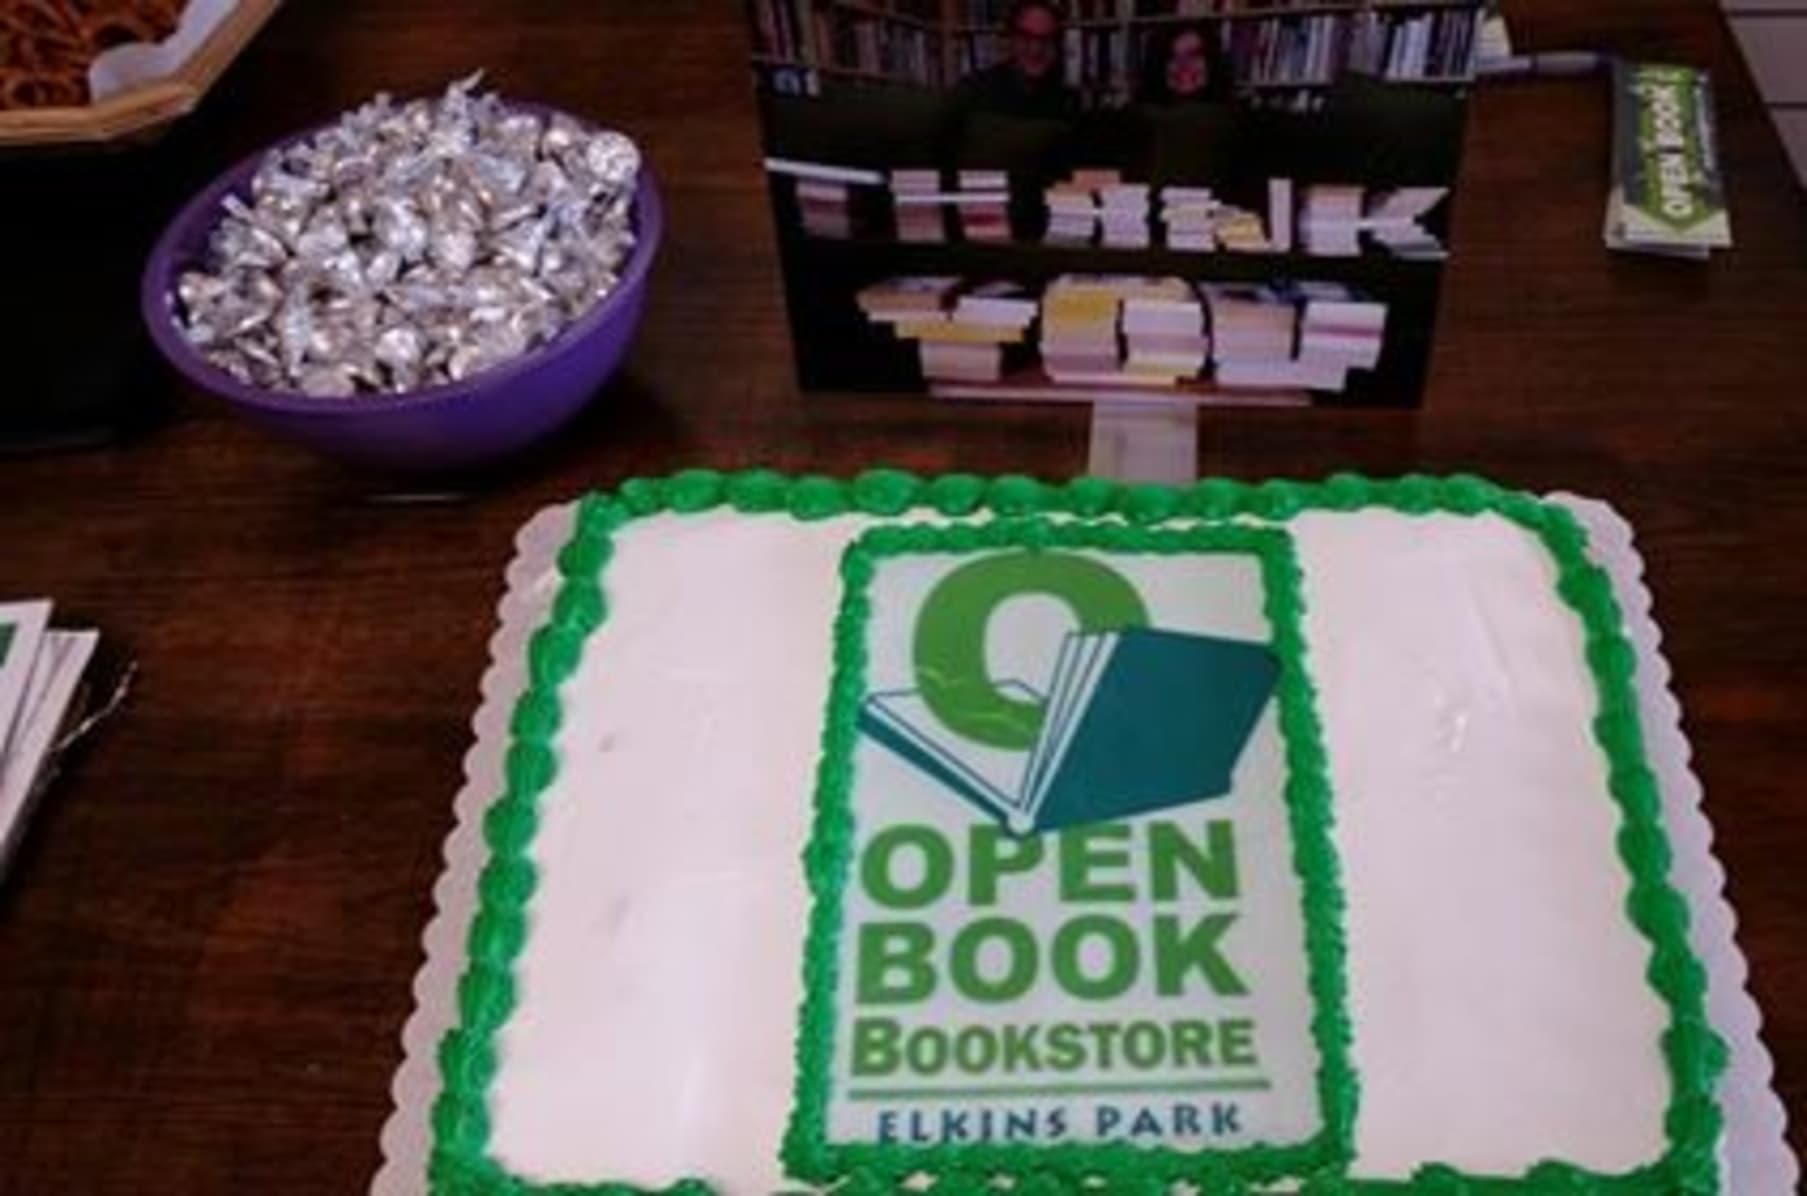 About Open Book Independent Bookstore Elkins Park